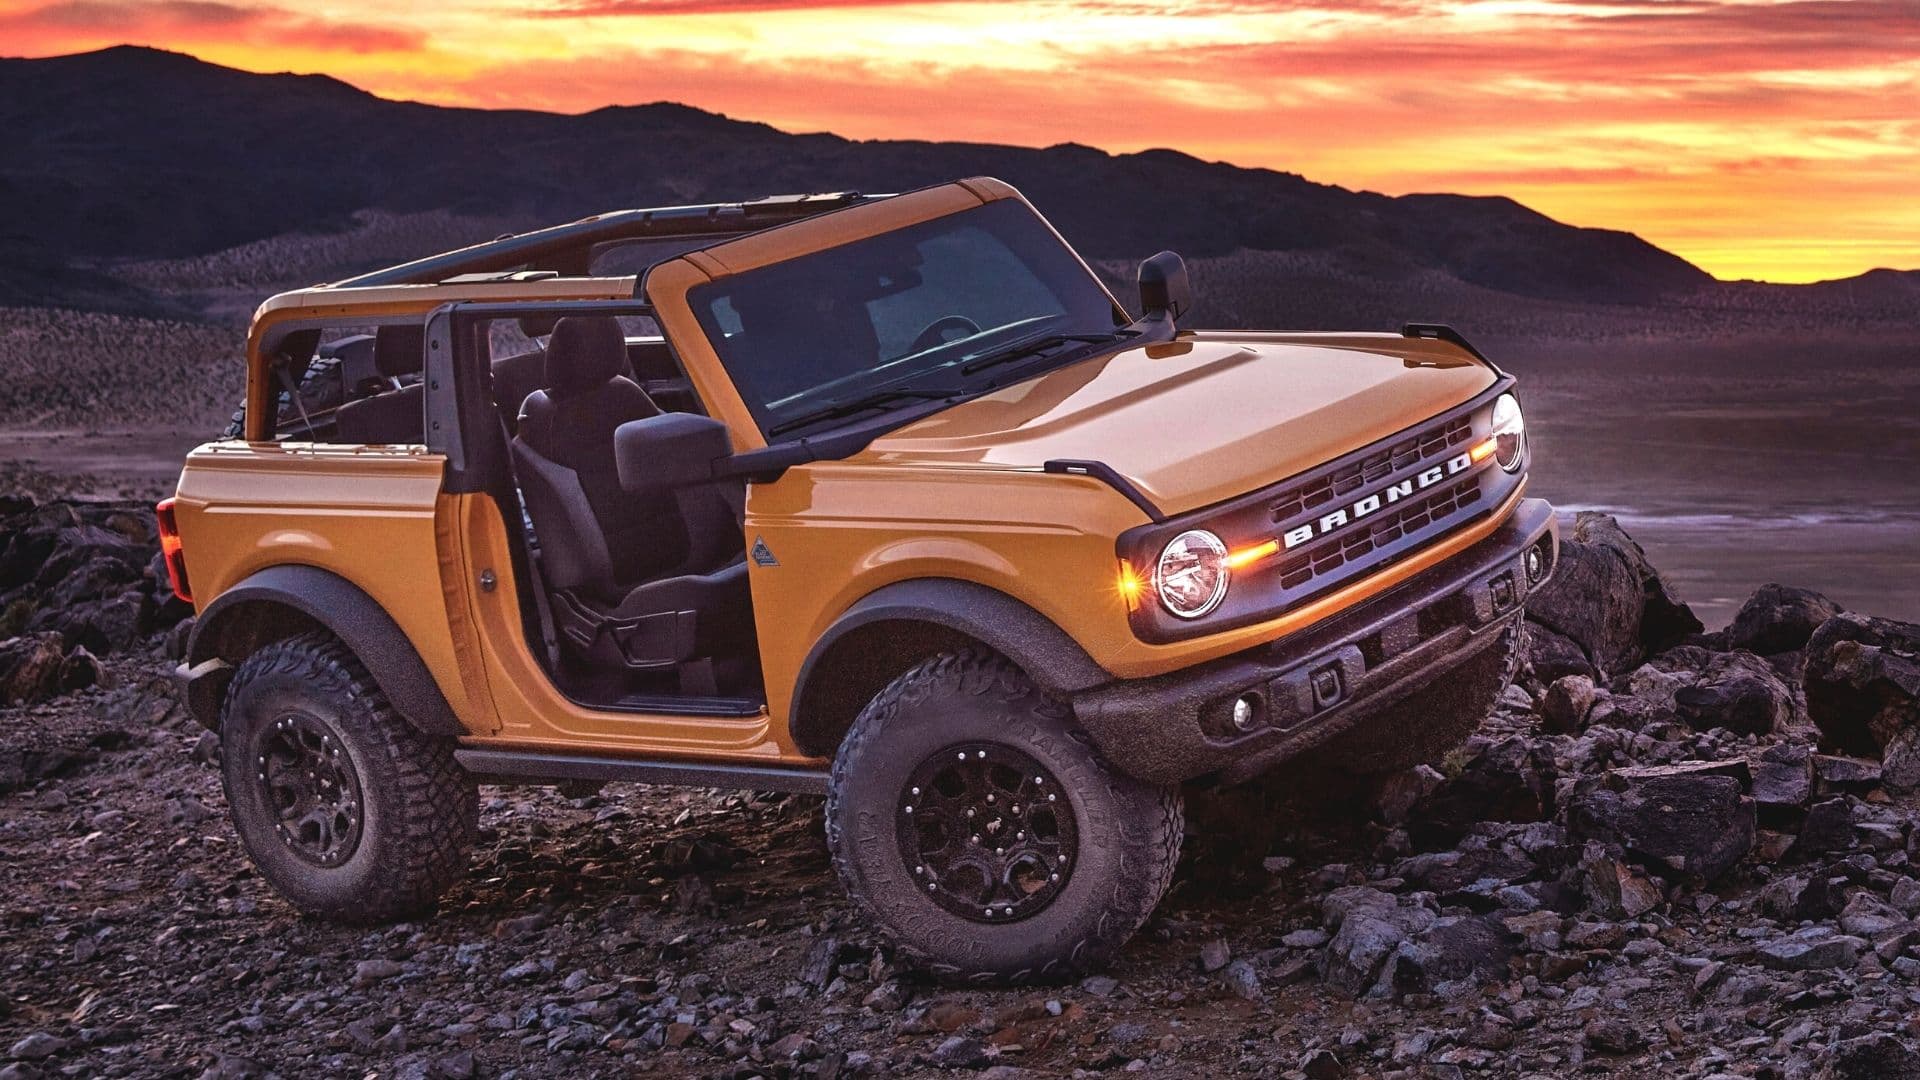 Ford Bronco Sasquatch With Manual Will Be Available in 2022